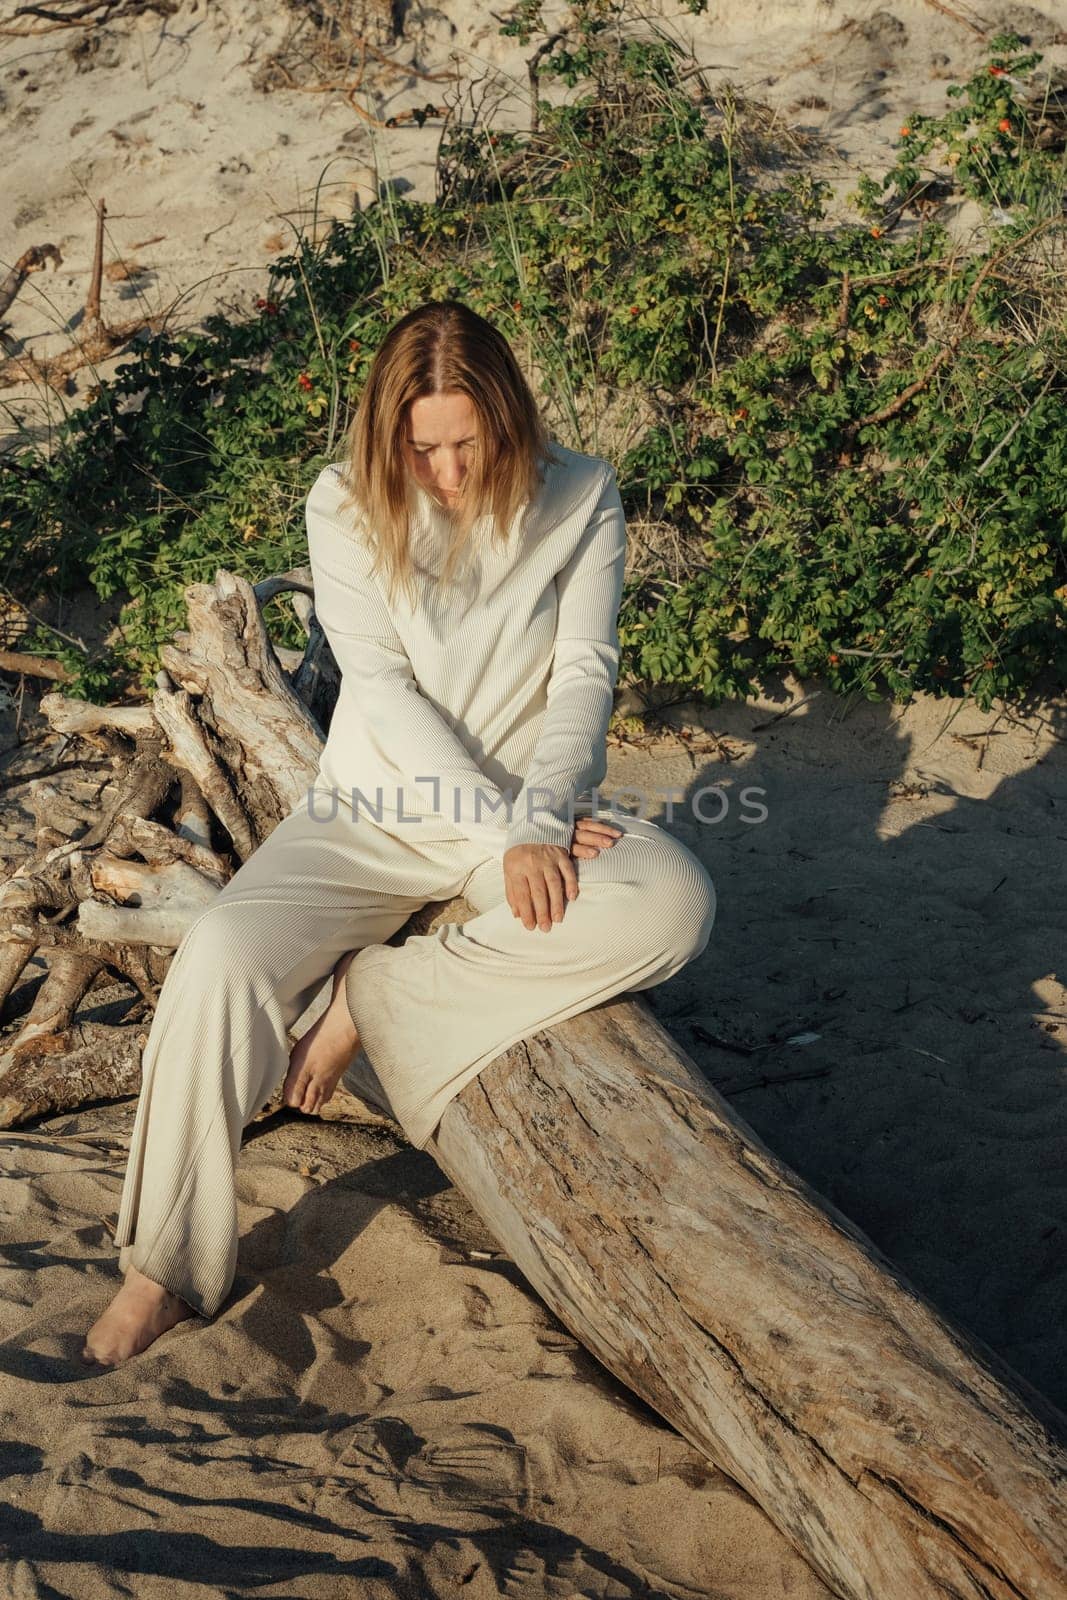 A woman is seated on a log on the sandy beach, looking out at the ocean waves on a sunny day.